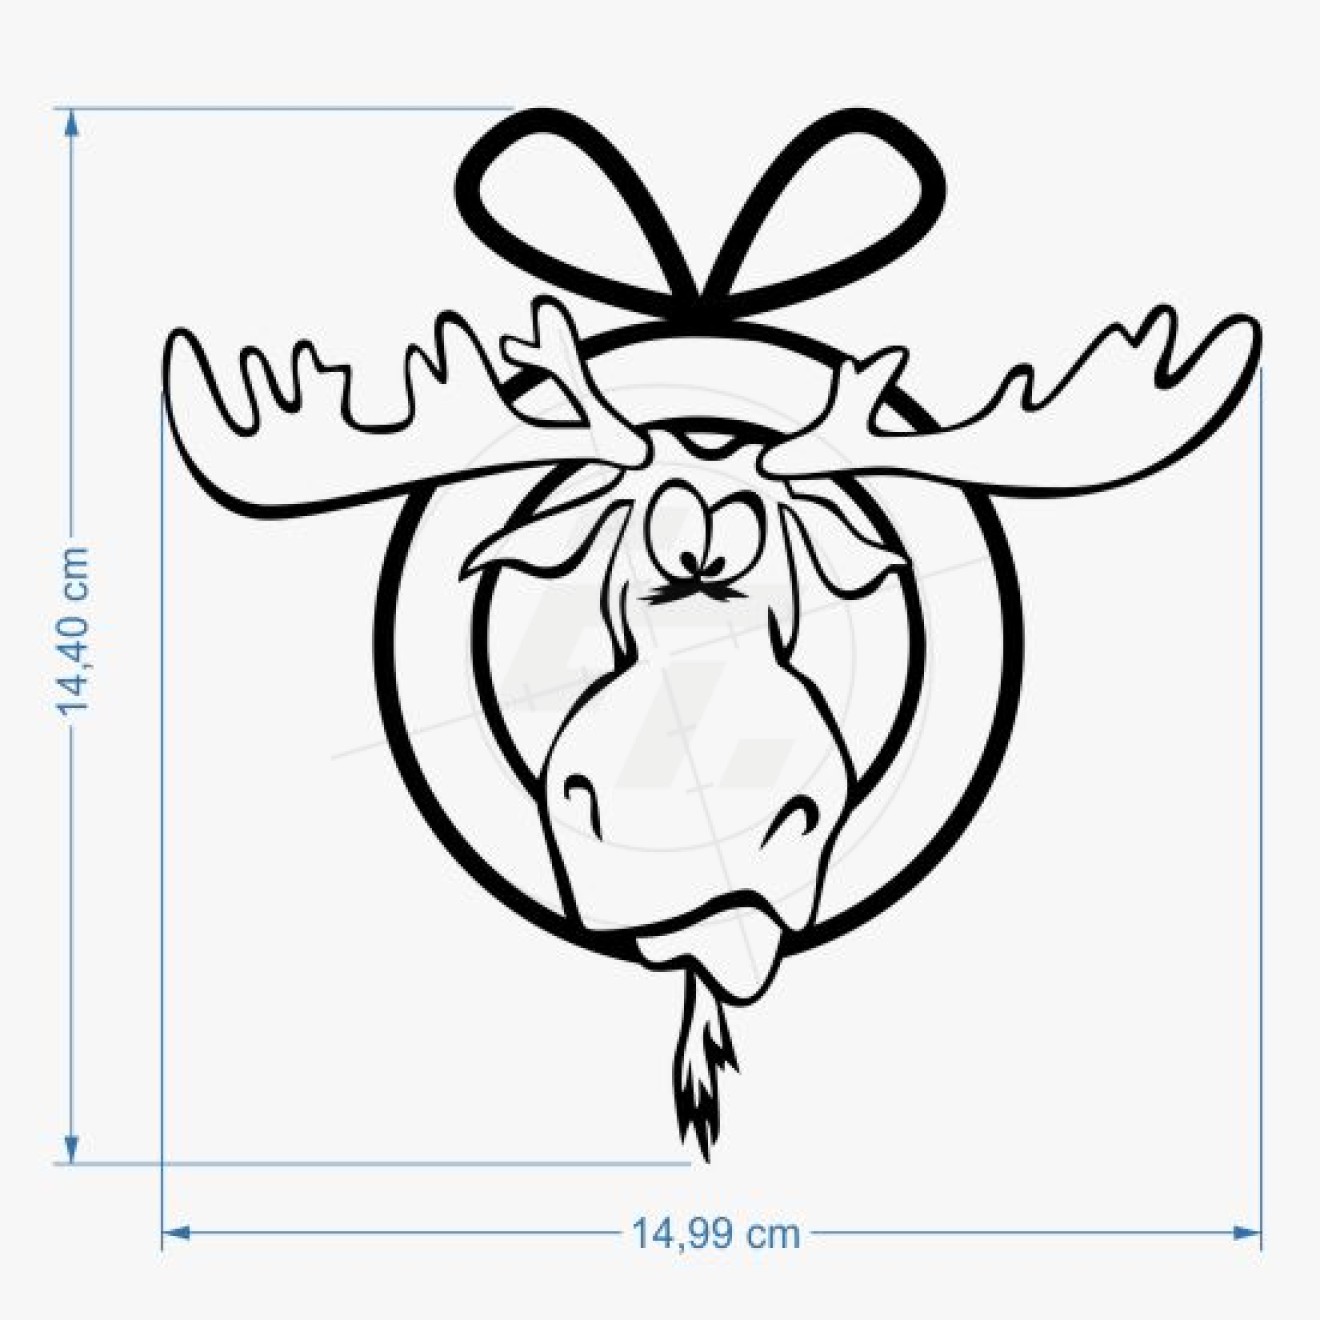 Funny moose with bow